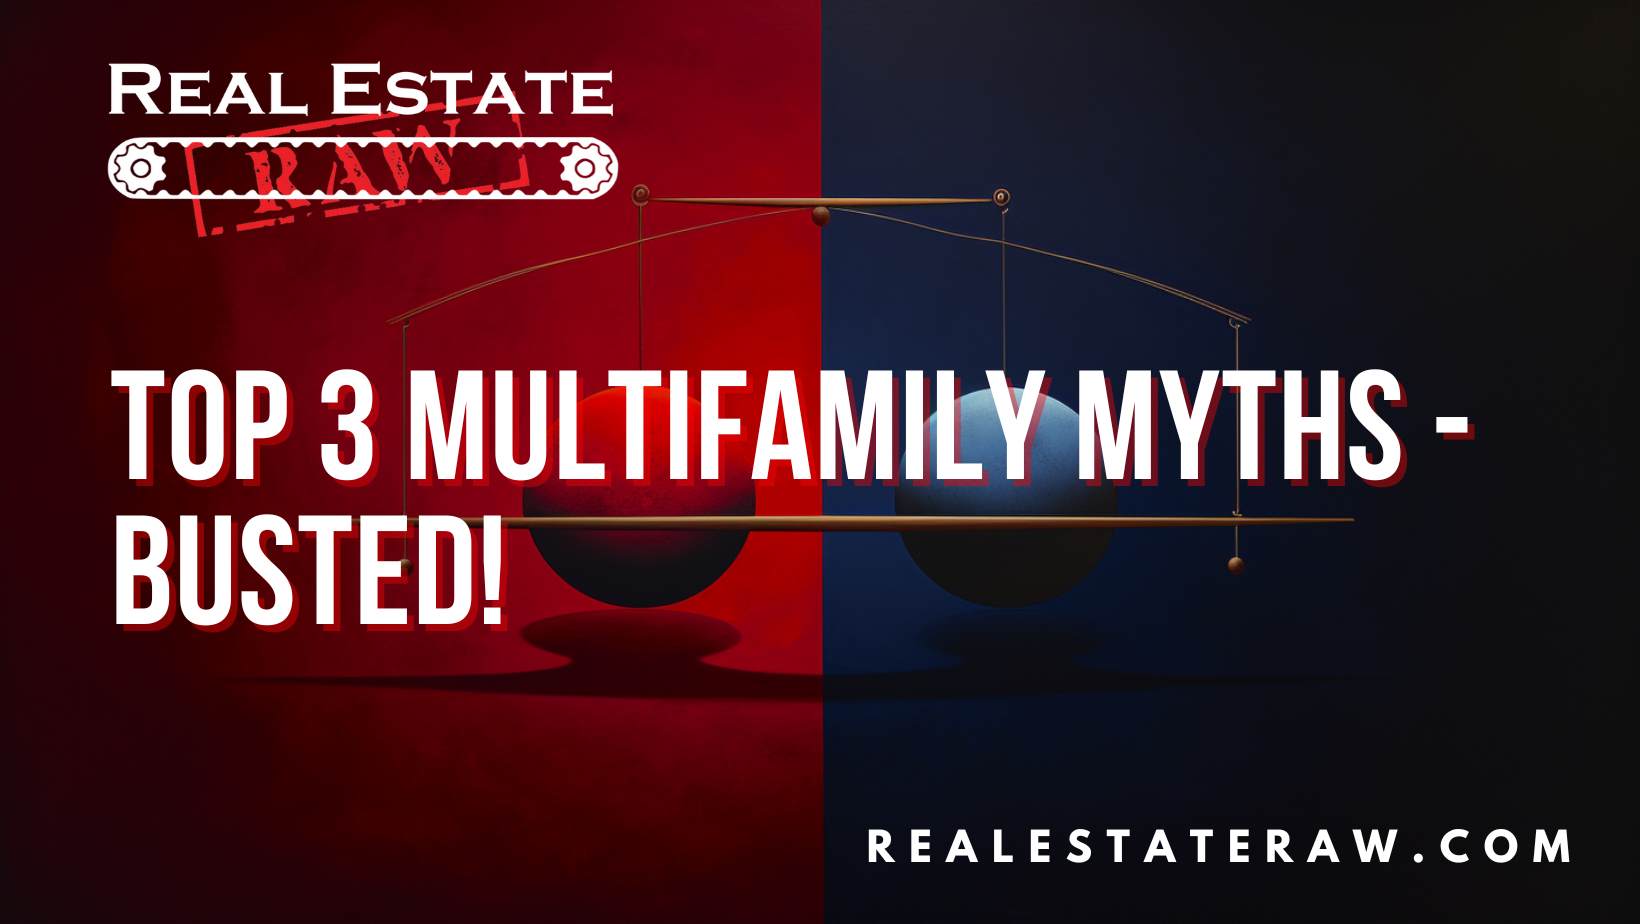 Top 3 Multifamily Myths - Busted!